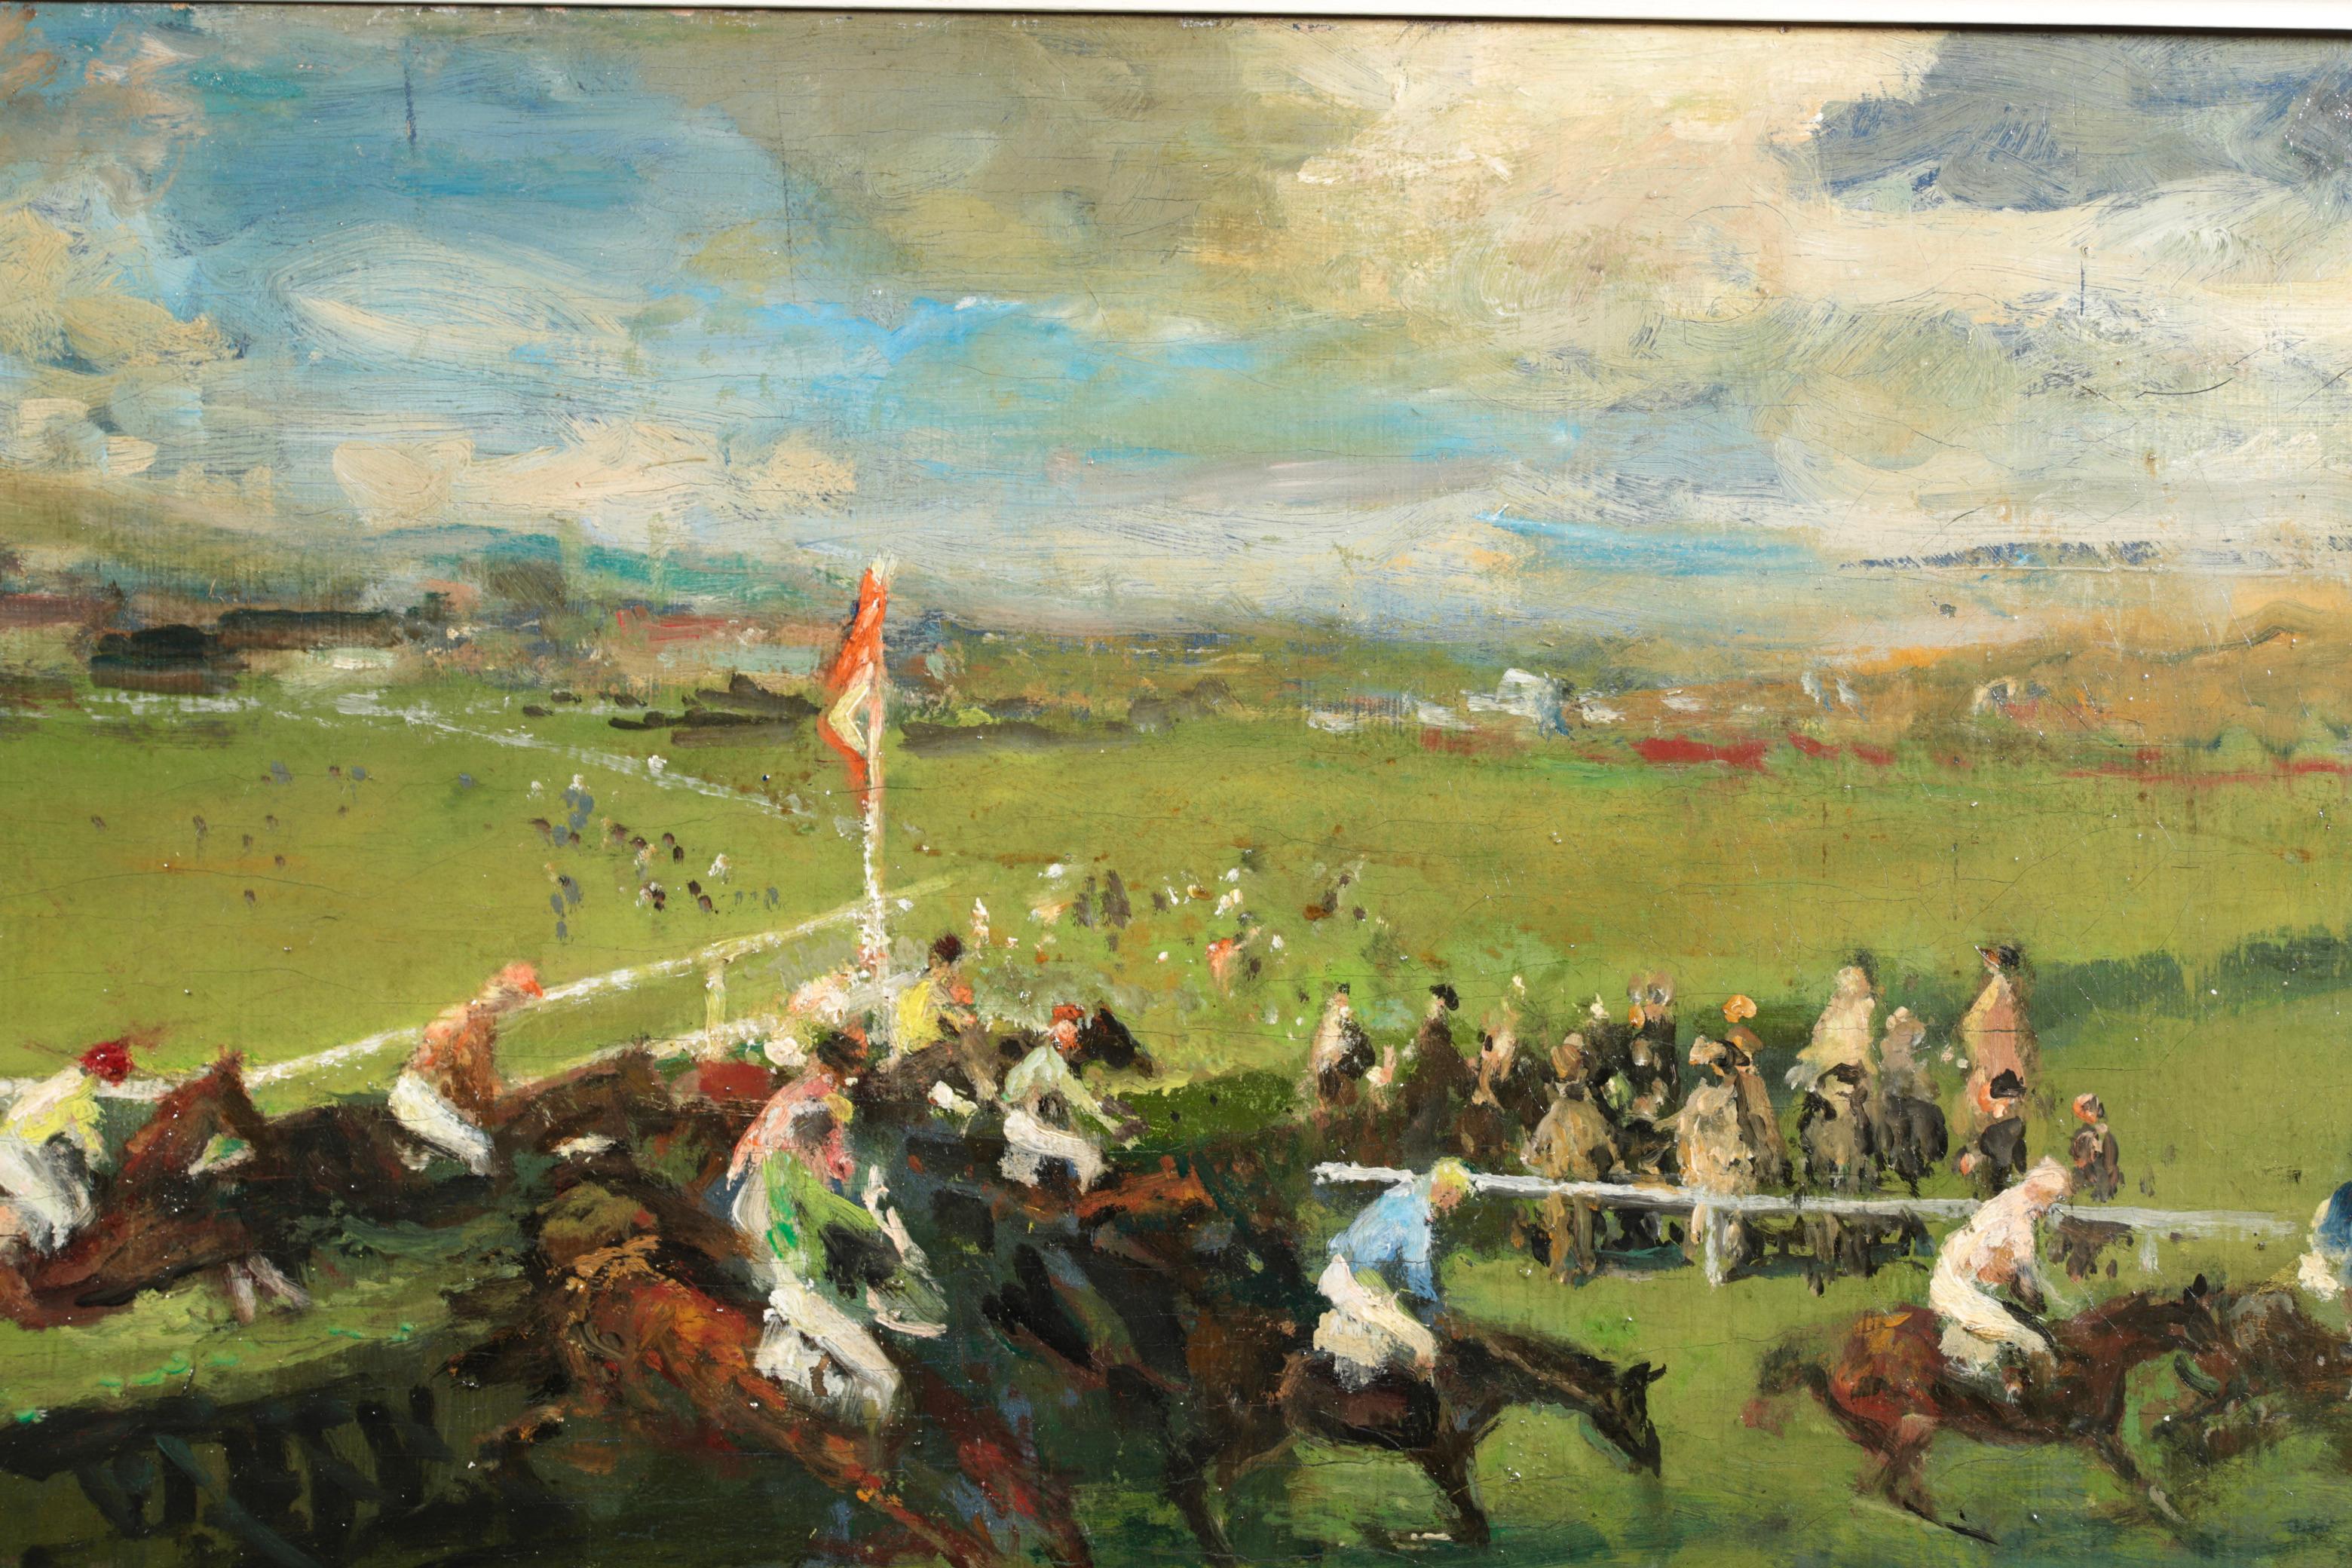 Signed post impressionist horses and figures in landscape oil on canvas by French painter Jacques-Emile Blanche. The work depicts crowds of people enjoying a day at the races and watching a steeplechase horse race as the horses and their jockey's